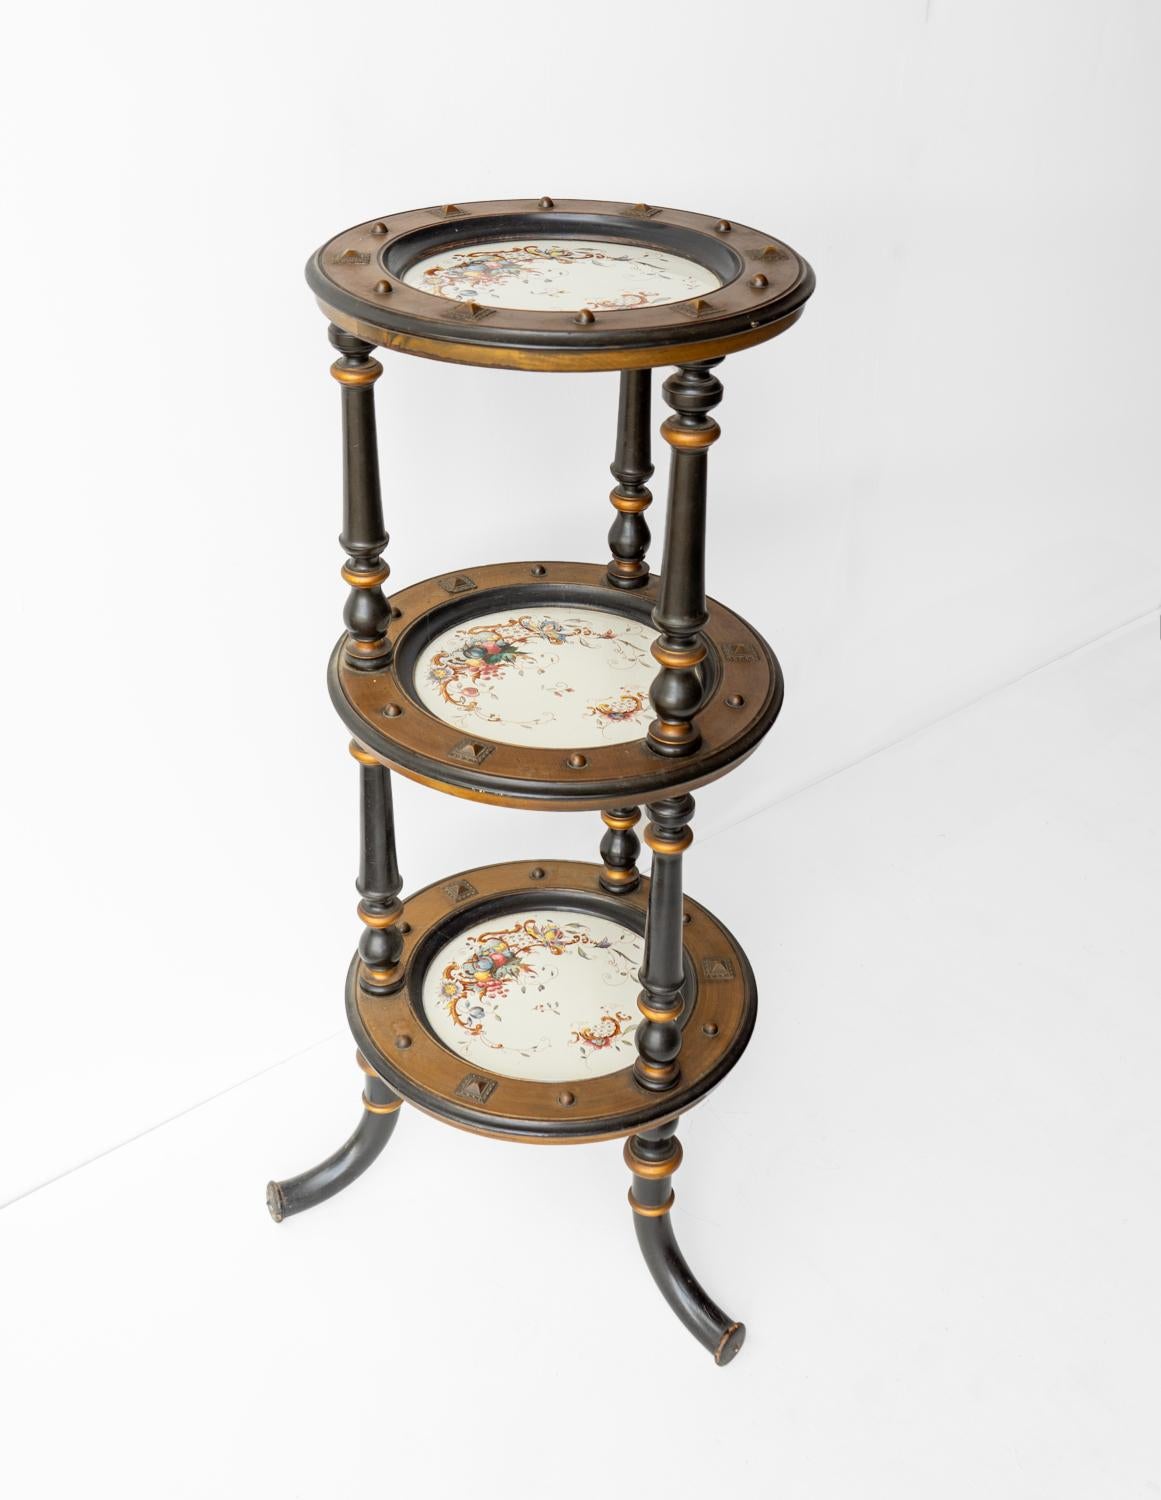 Aesthetic Movement Three Tiered Cake Stand, 19th Century Victorian cake display For Sale 3